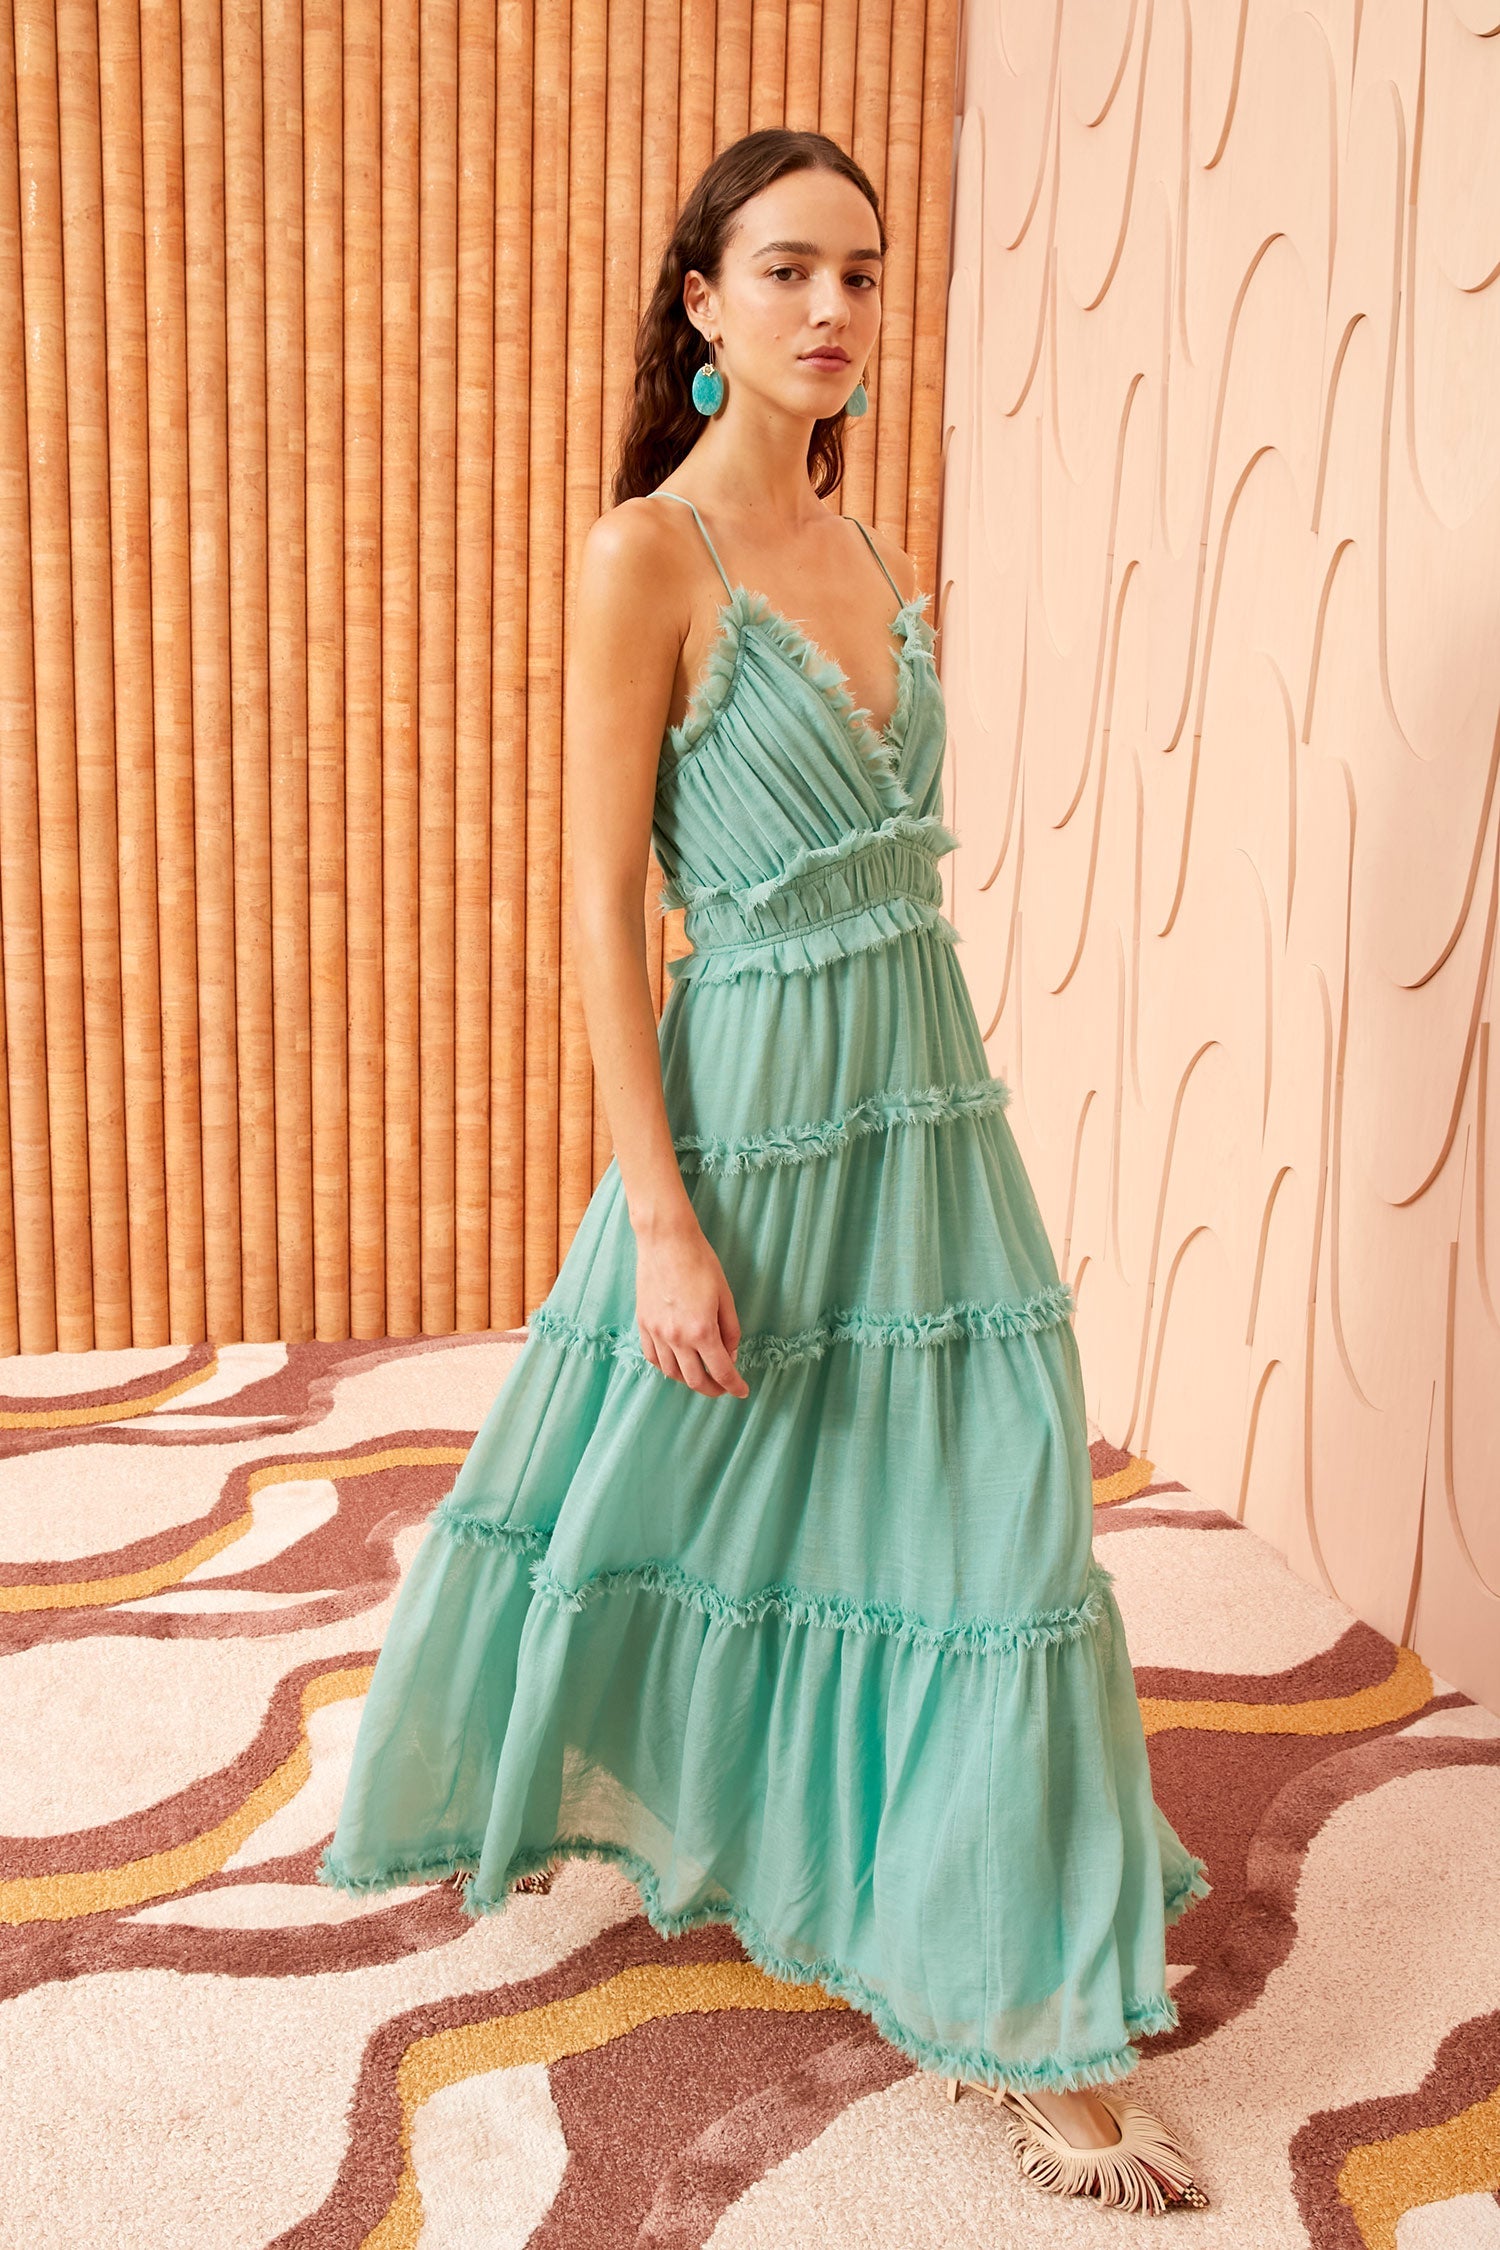 The Ulla Johnson Shyla Gown in Sea Glass available at The New Trend Australia